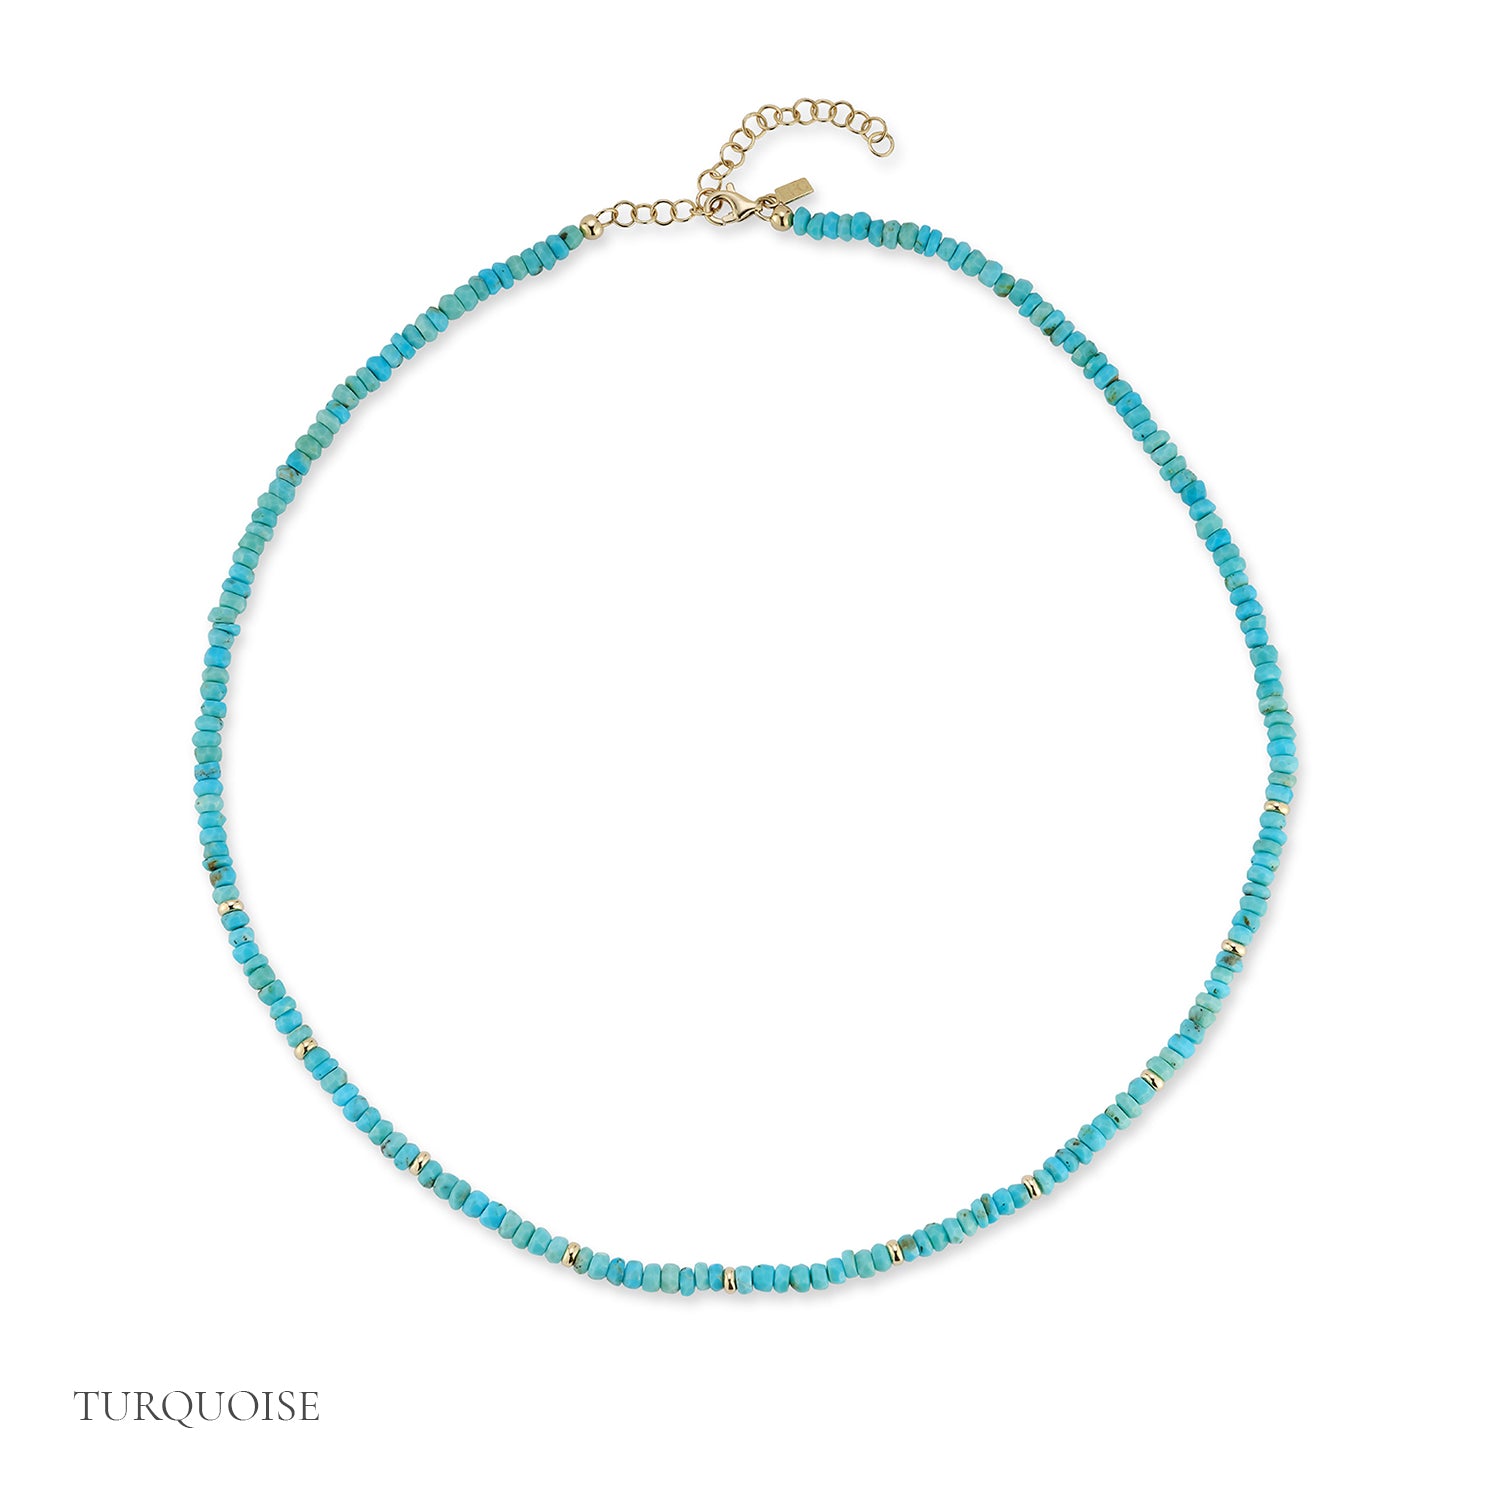 Birthstone Bead Necklace In Turquoise with 14k yellow gold chain